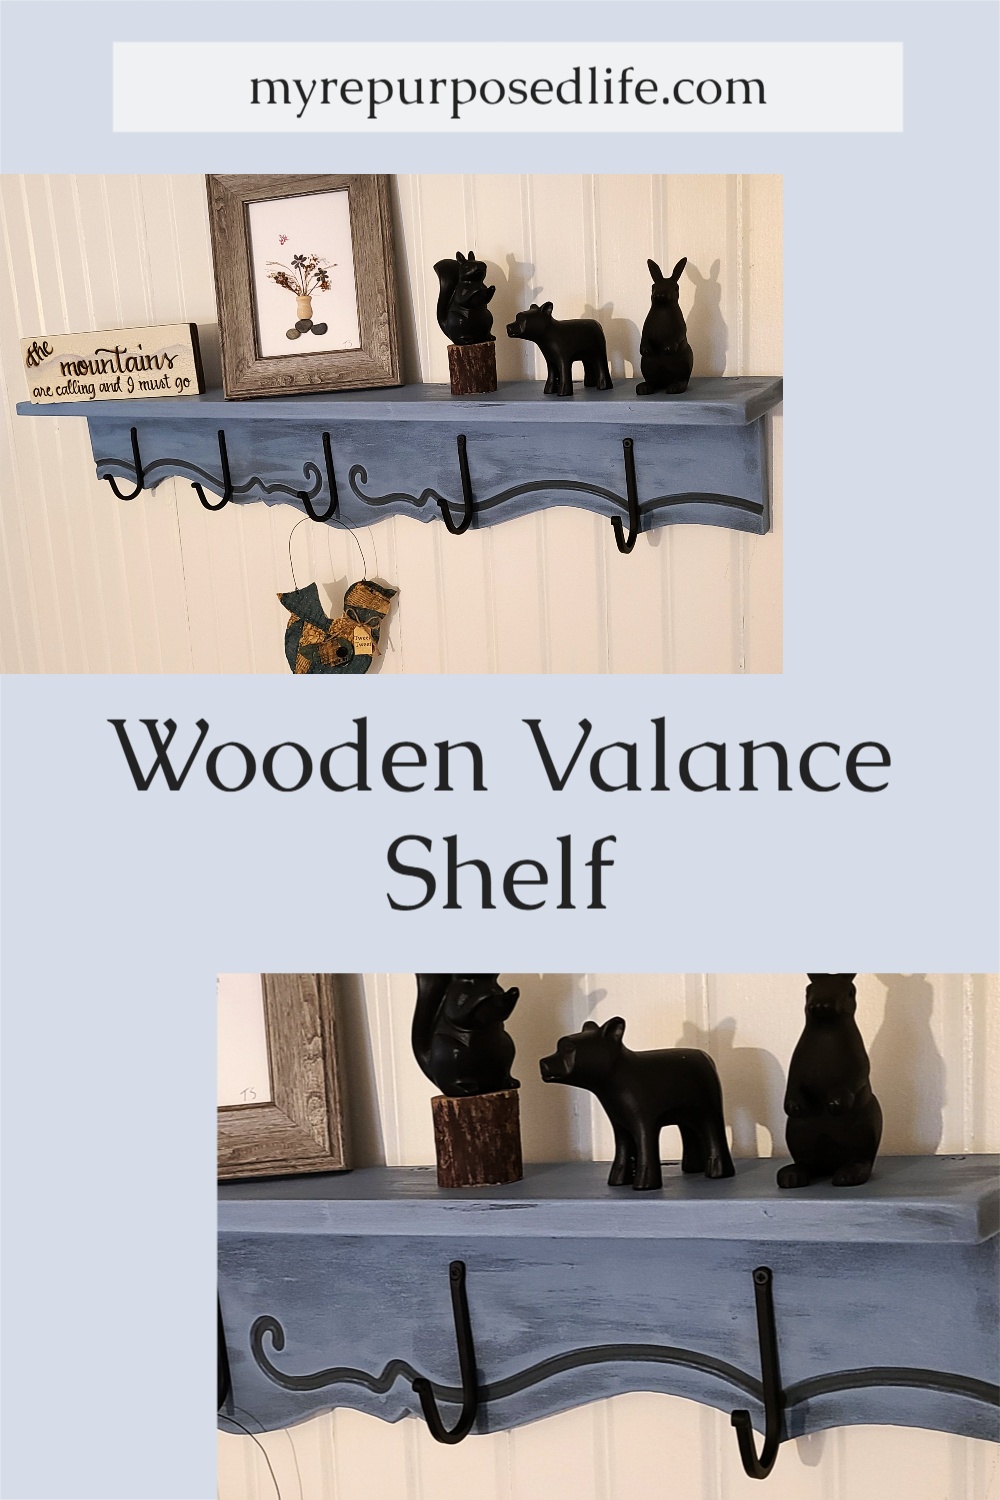 How to make a wooden valance shelf using an old kitchen cabinet piece, new lumber and cute black hooks for hanging items. #MyRepurposedLife #repurposed #upcycle #diy #hook #shelf #valance via @repurposedlife